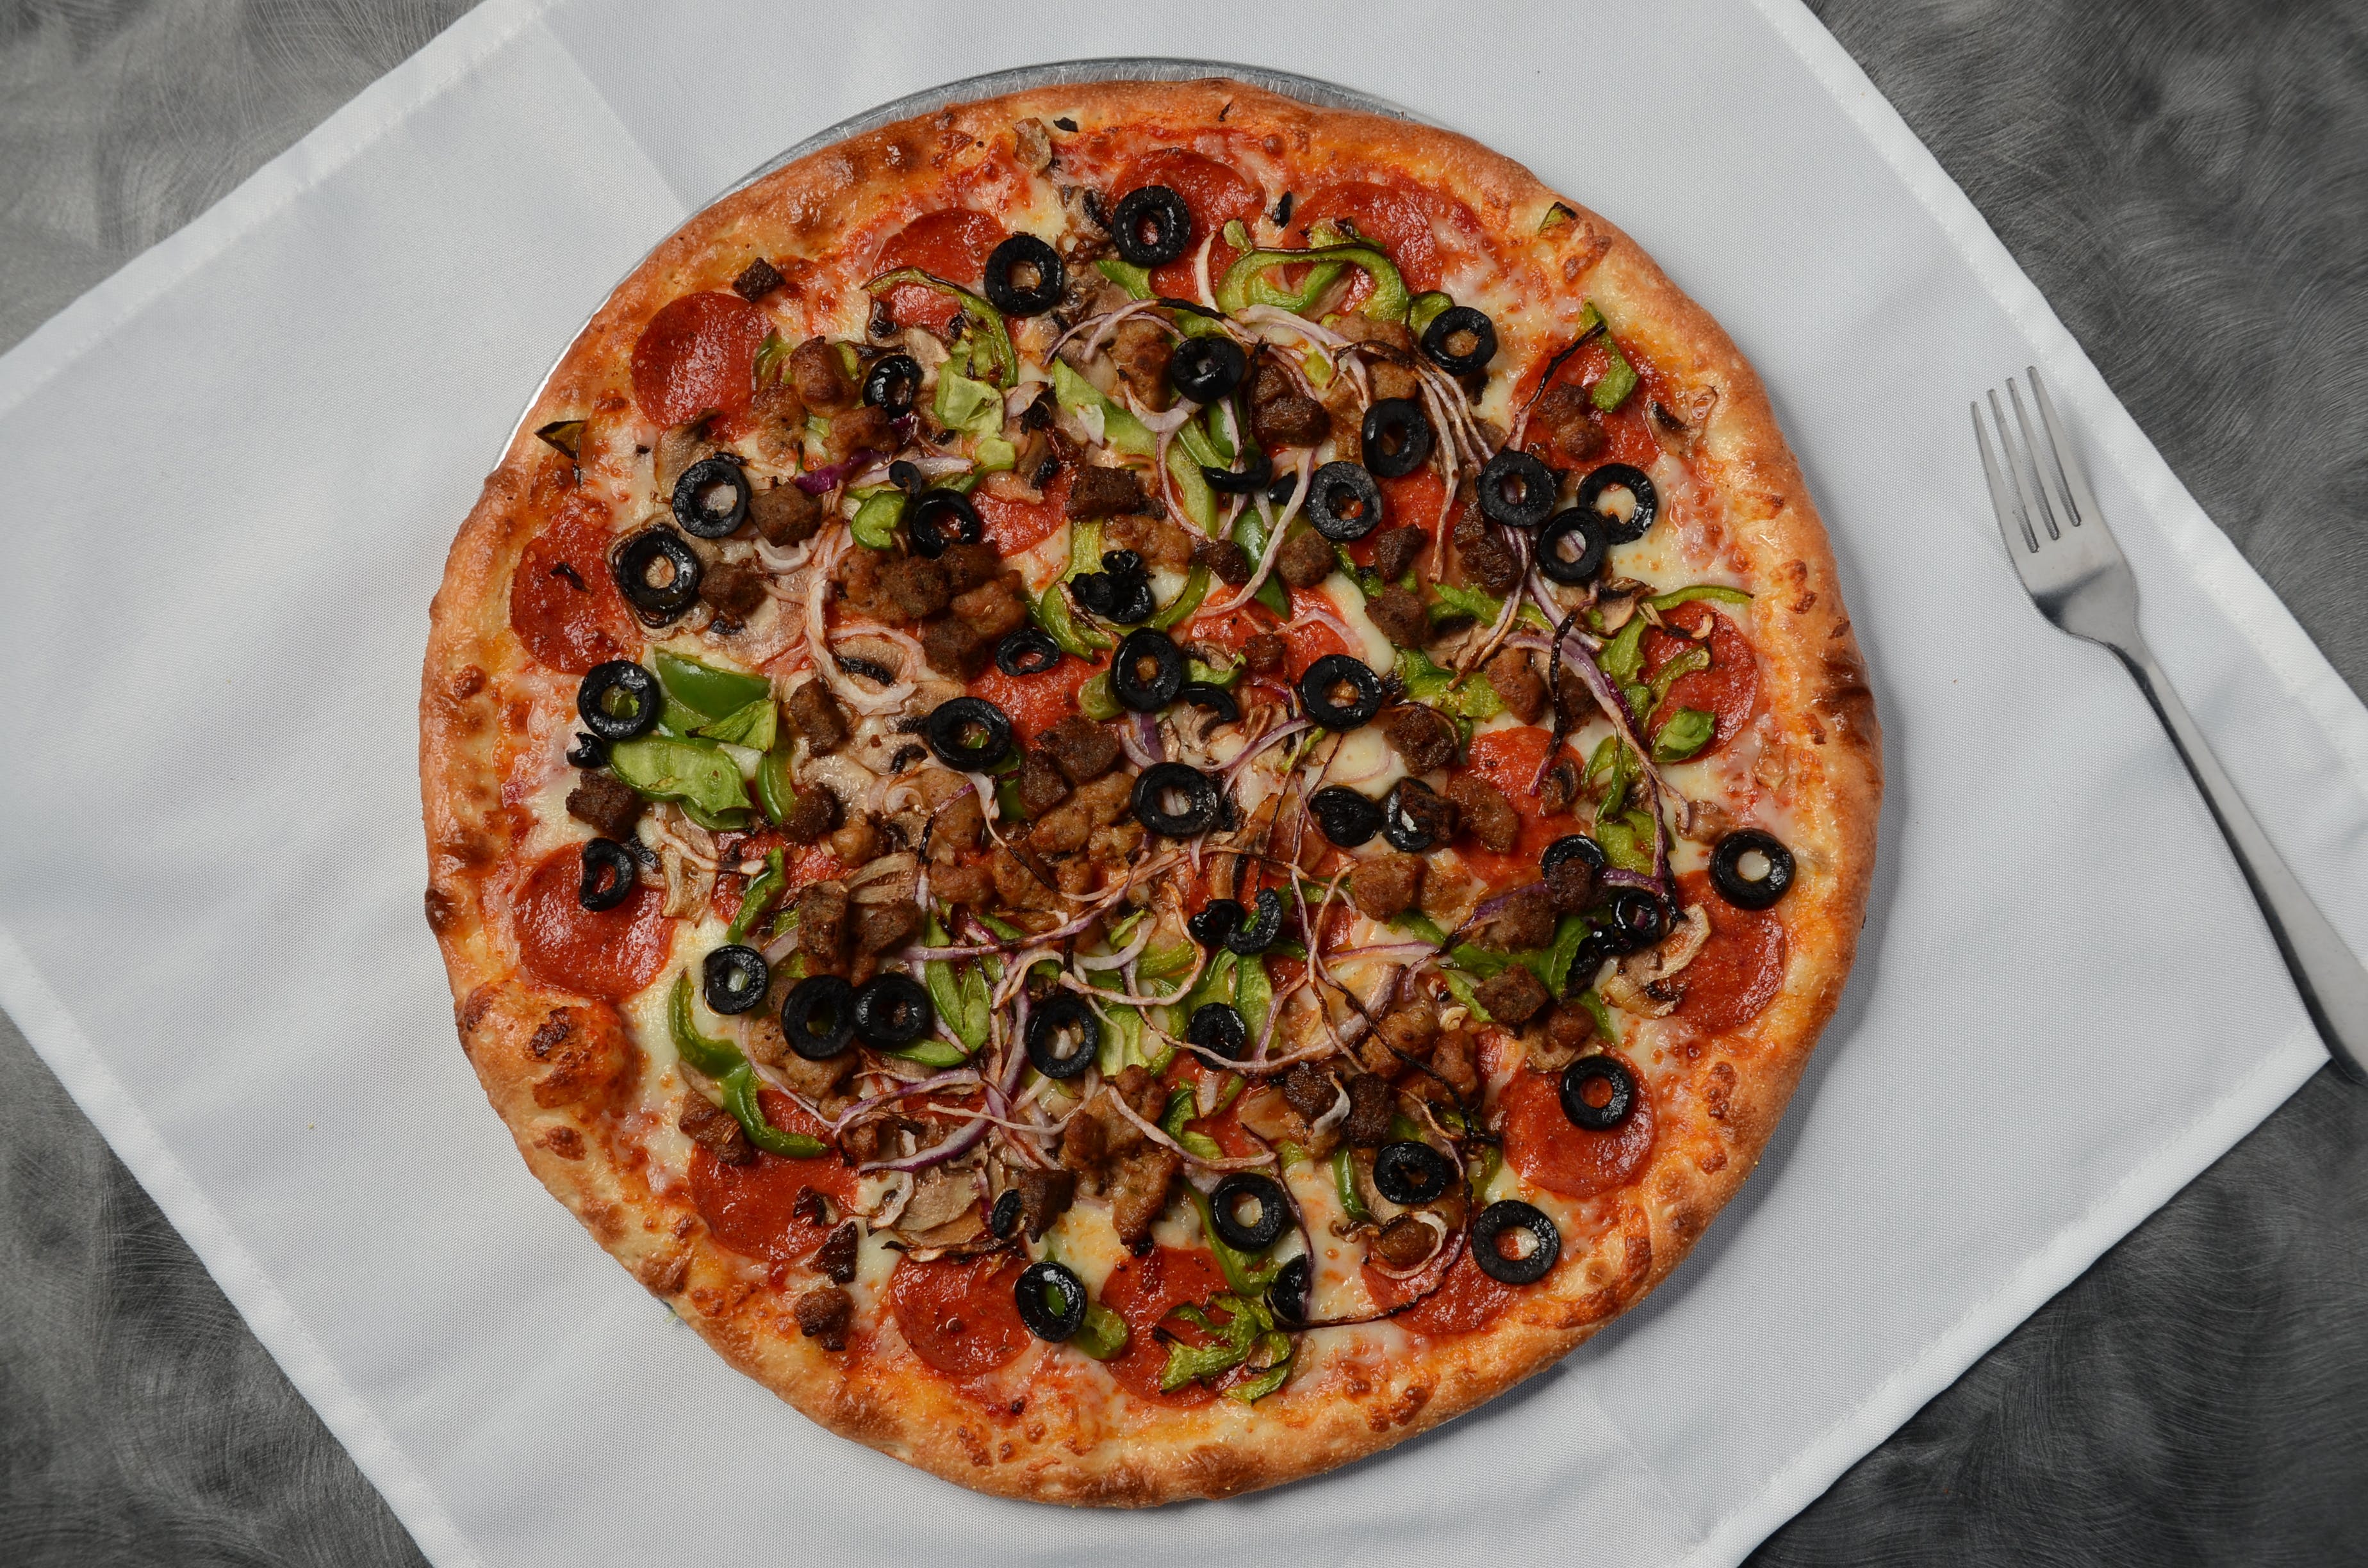 File:Papa John's Pizza small pepperoni and black olives pizza pie